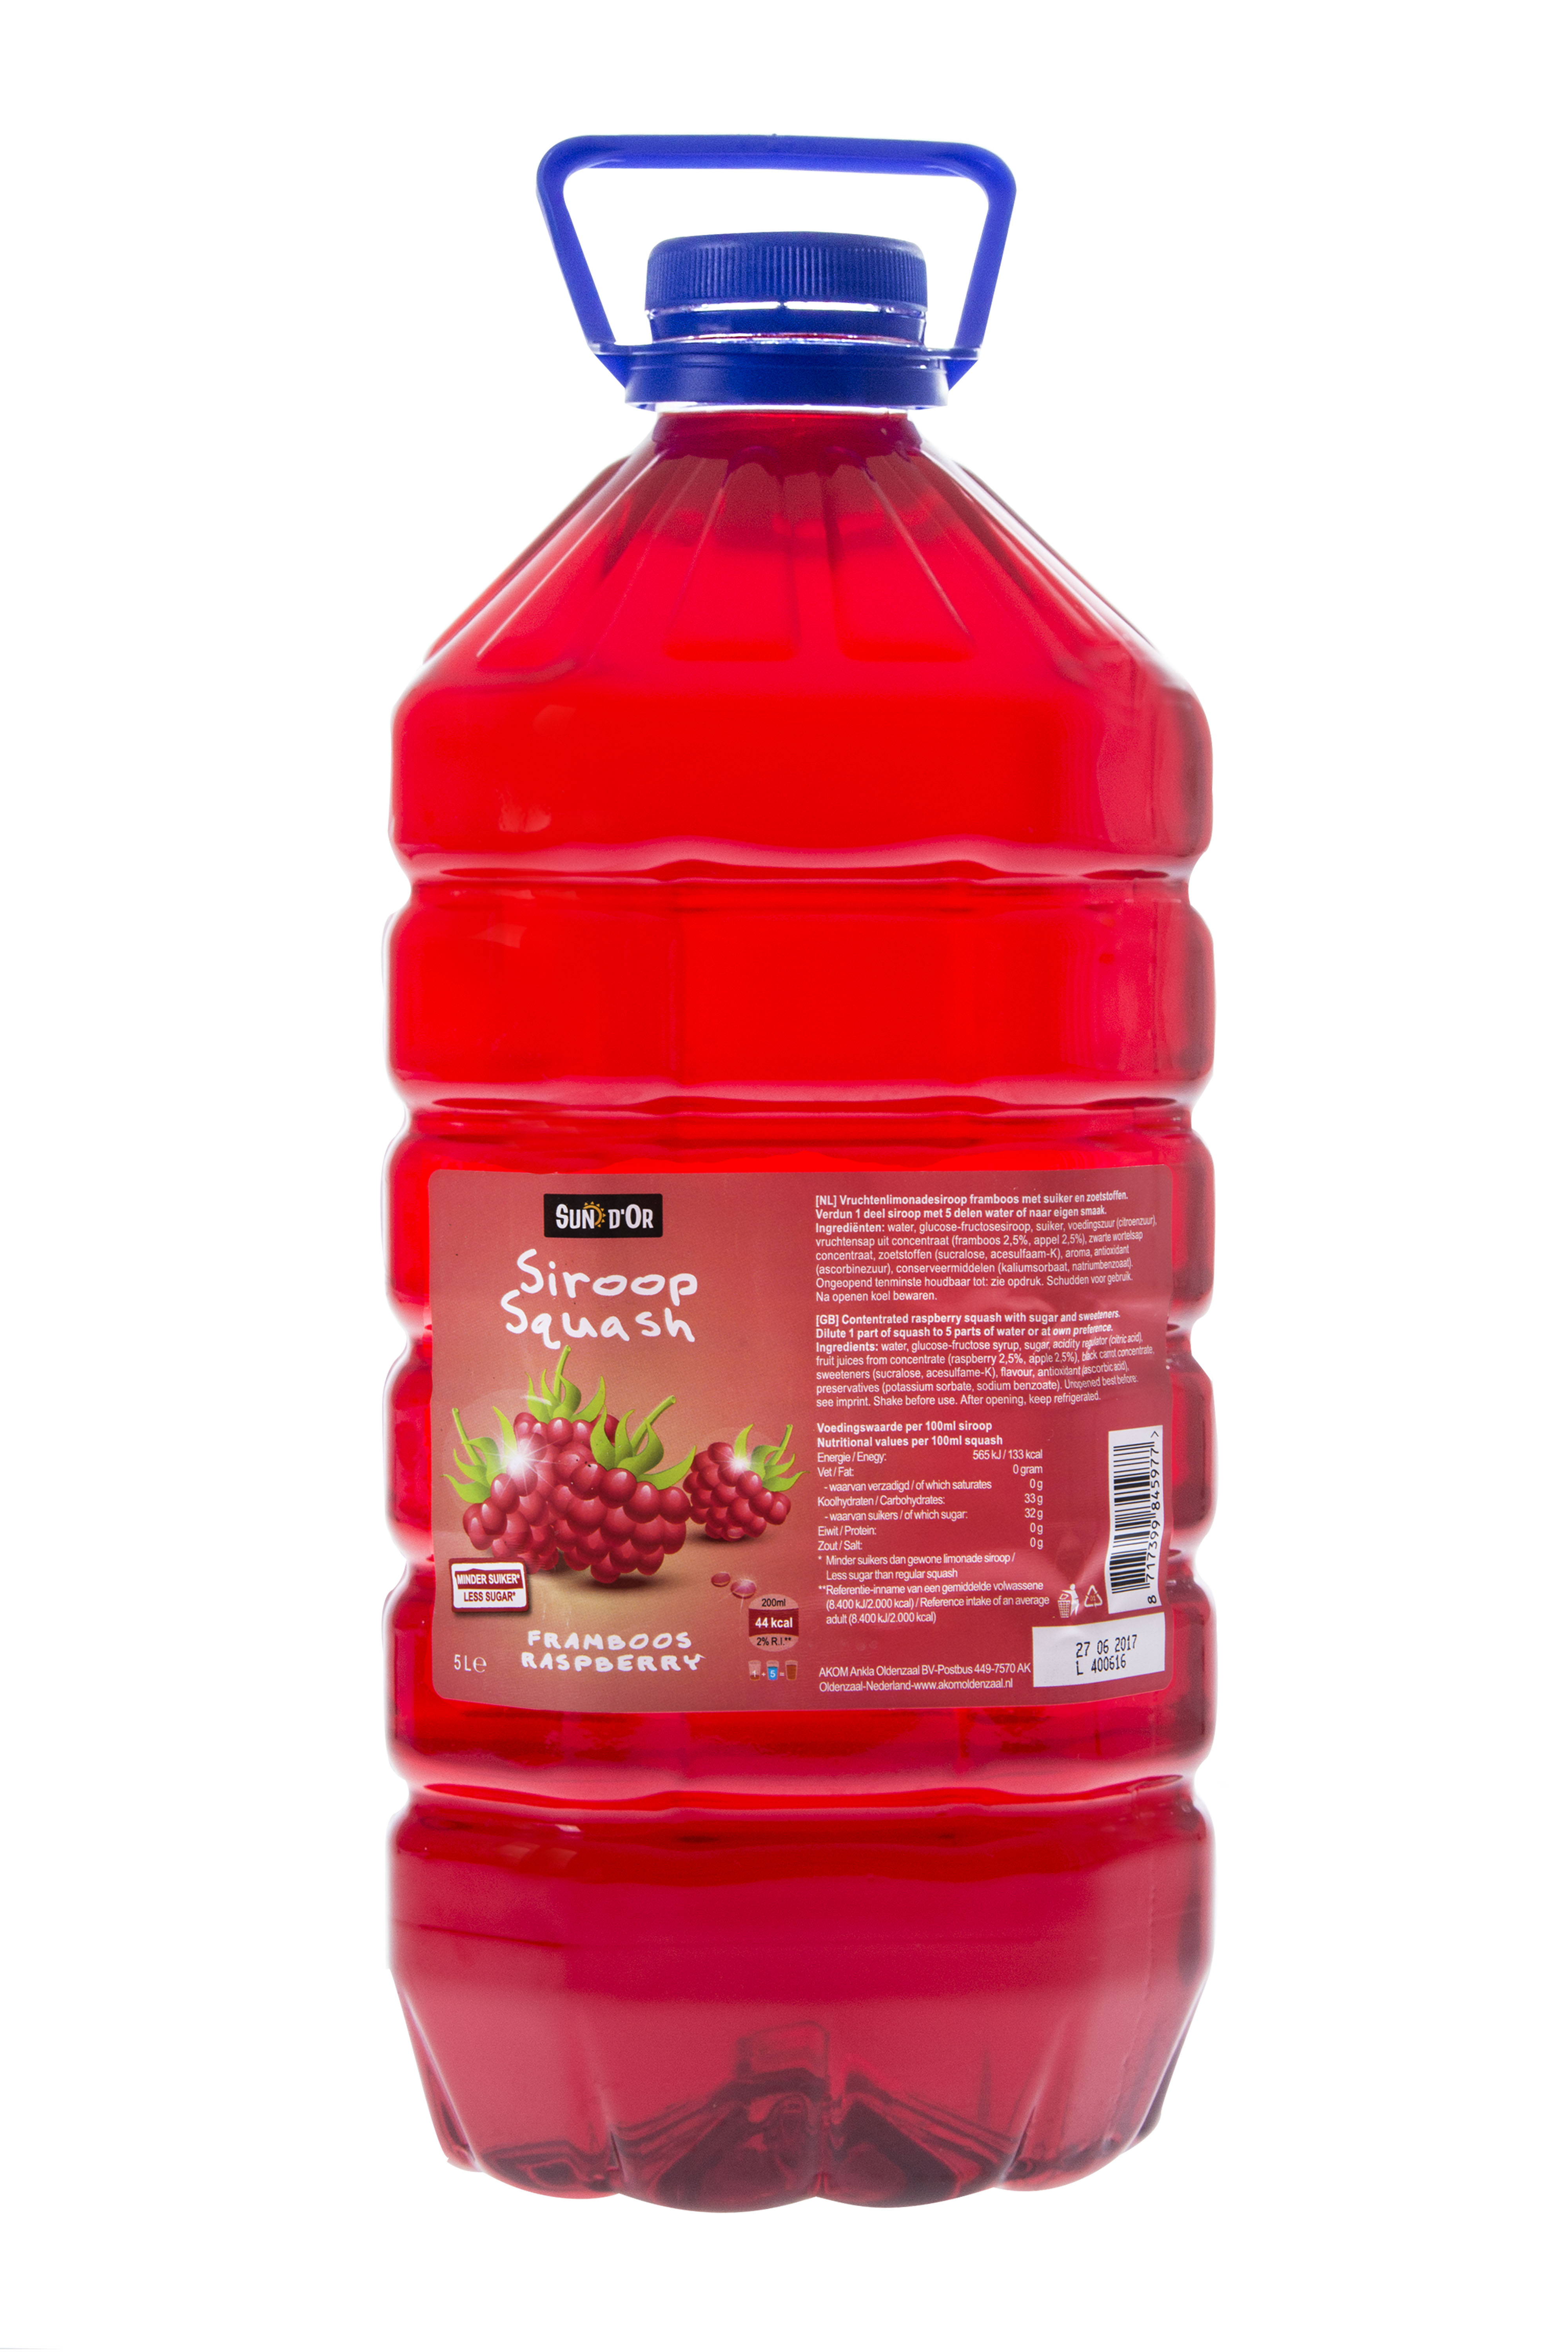 Sun d'Or Himbeere Sirupe 5 liter 